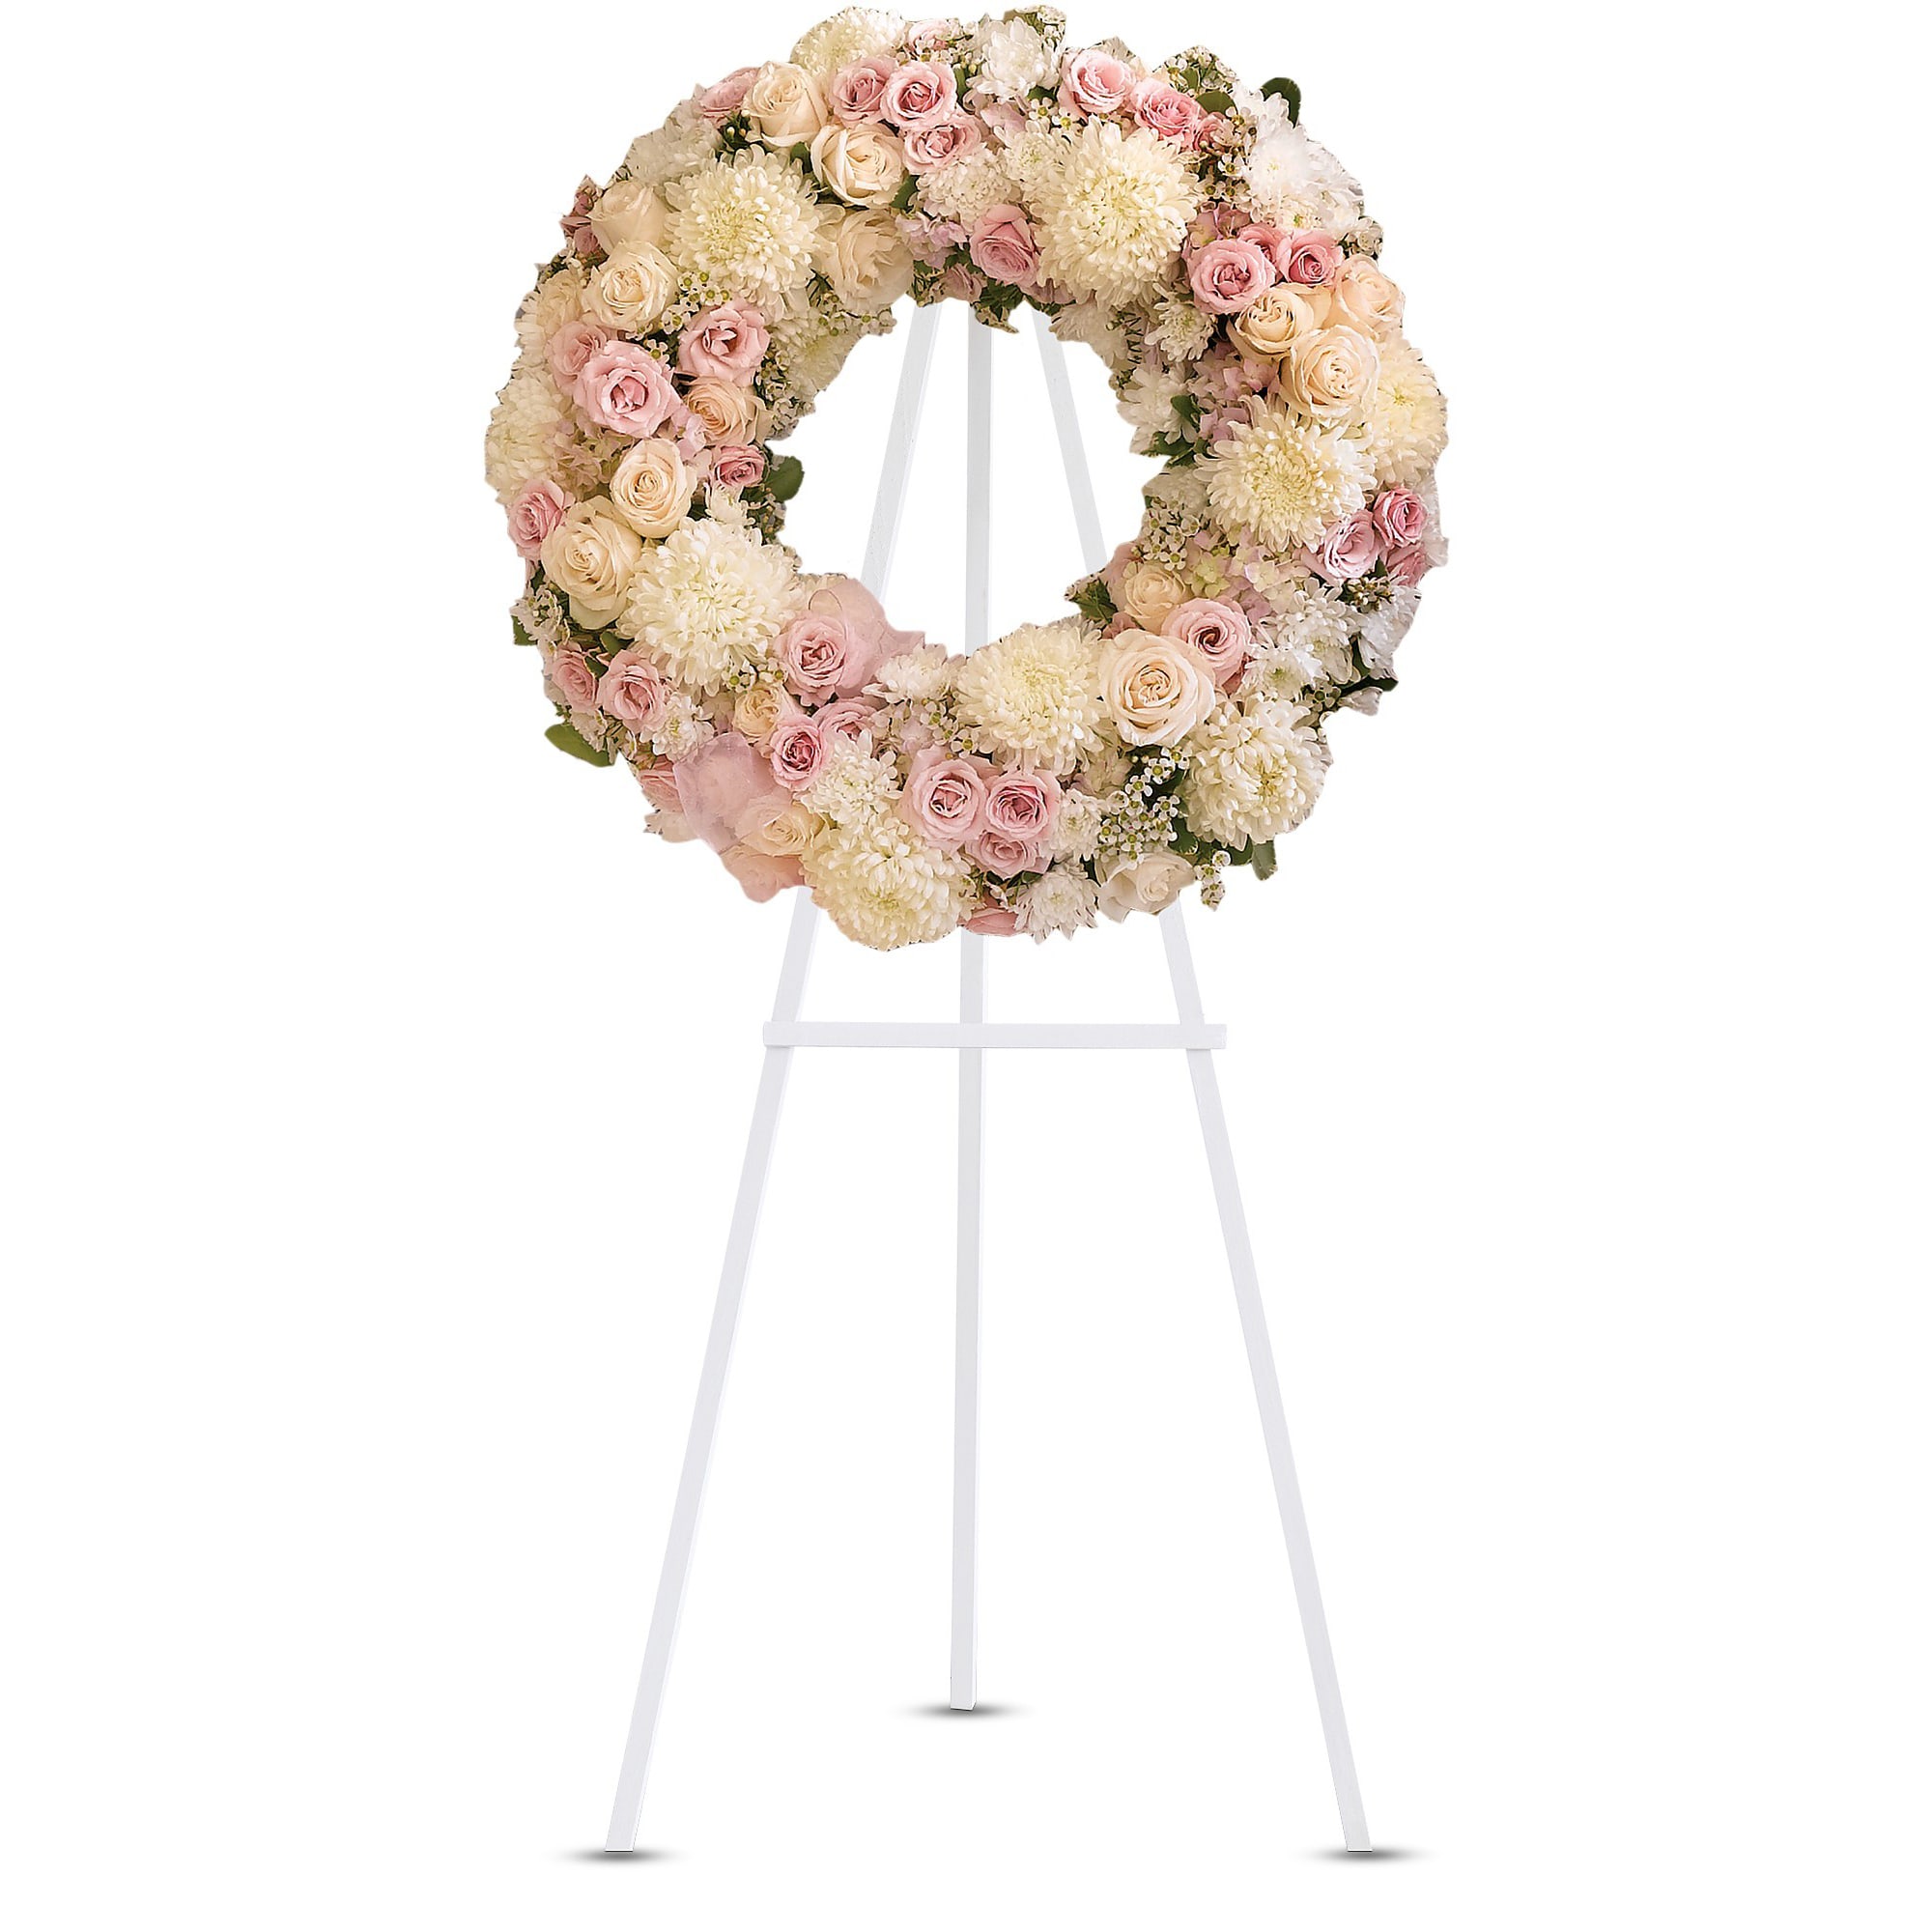 Peace Eternal Wreath by Teleflora - A breathtaking expression of love and devotion, this lovely wreath delivers a message that is both subtle and strong. Its soft pastel blossoms will soothe, while its extraordinary beauty will express the depth of your emotions. 